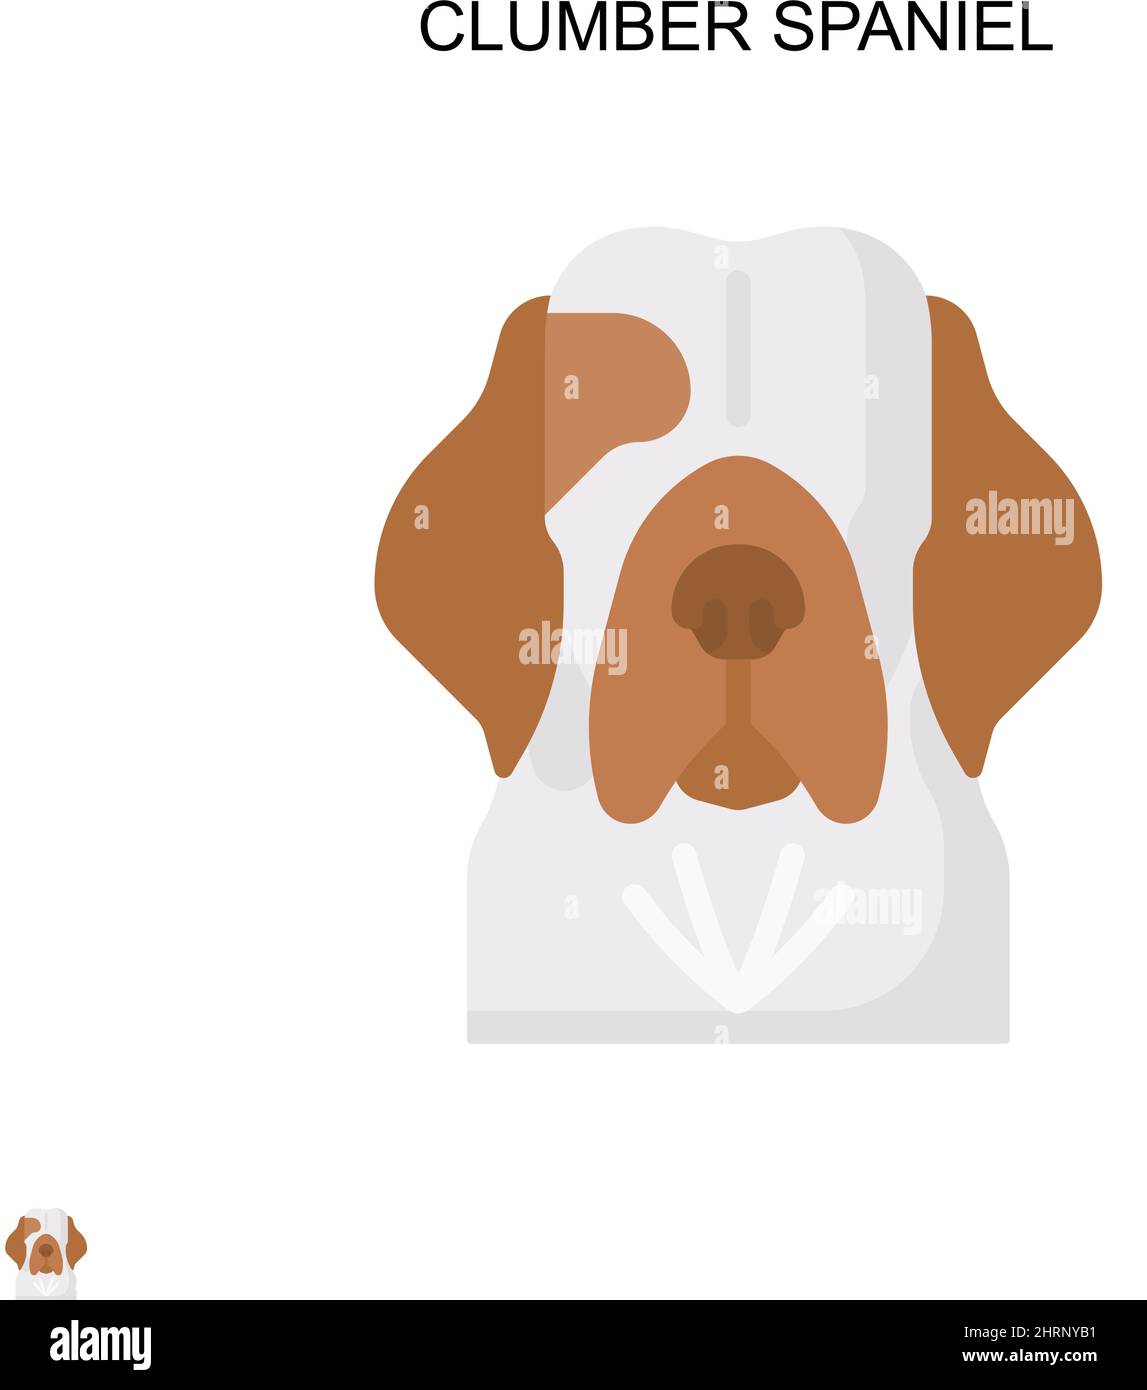 Clumber spaniel Simple vector icon. Illustration symbol design template for web mobile UI element. Stock Vector